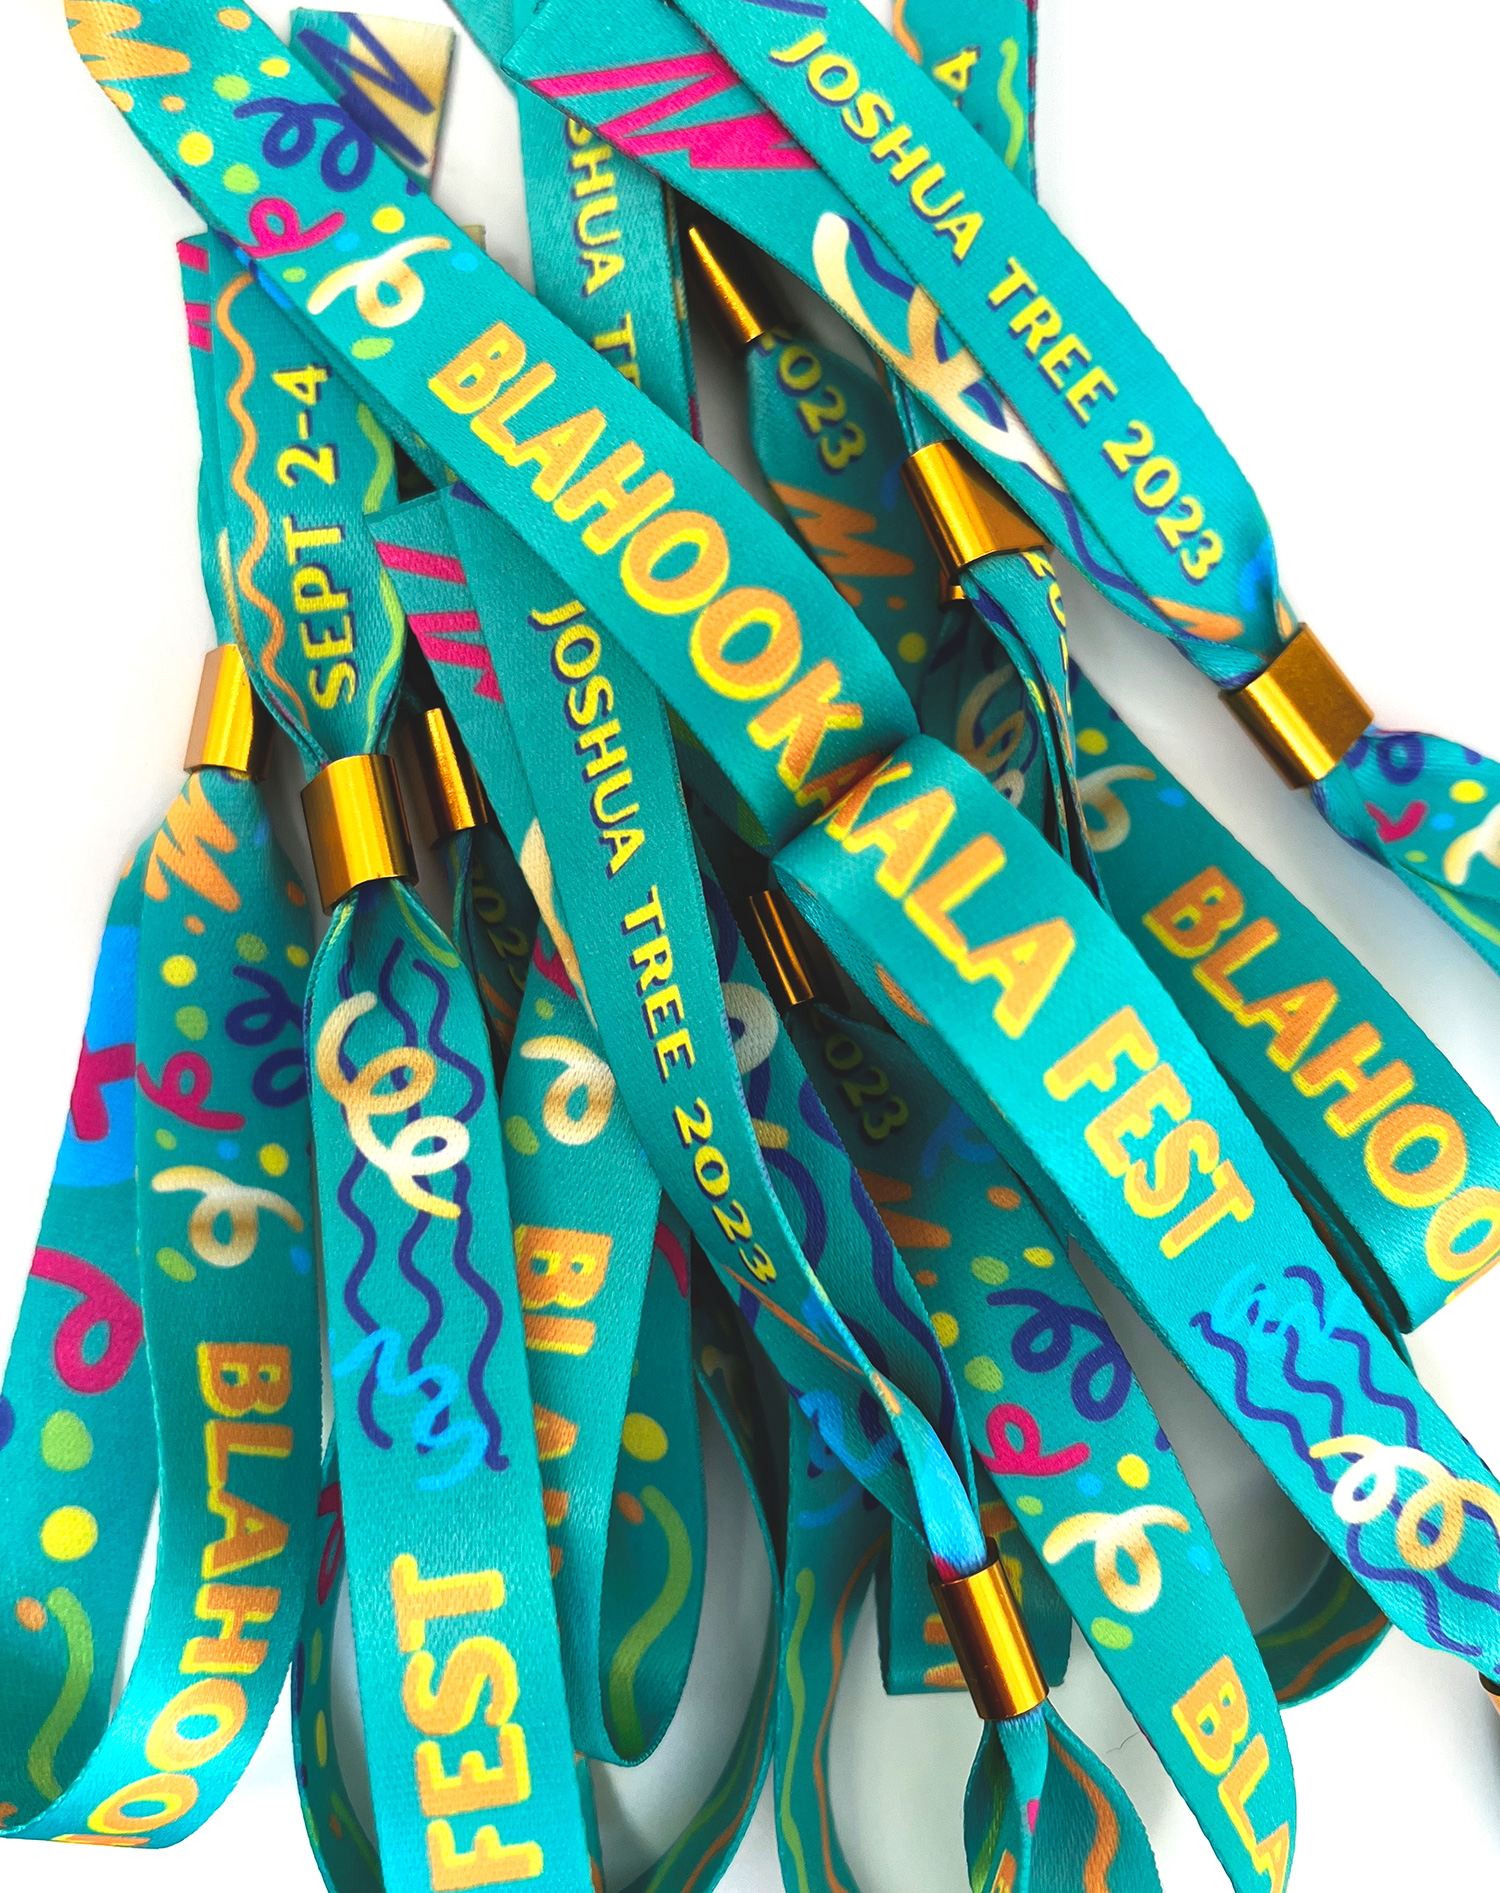 printed fabric festival event party wristbands